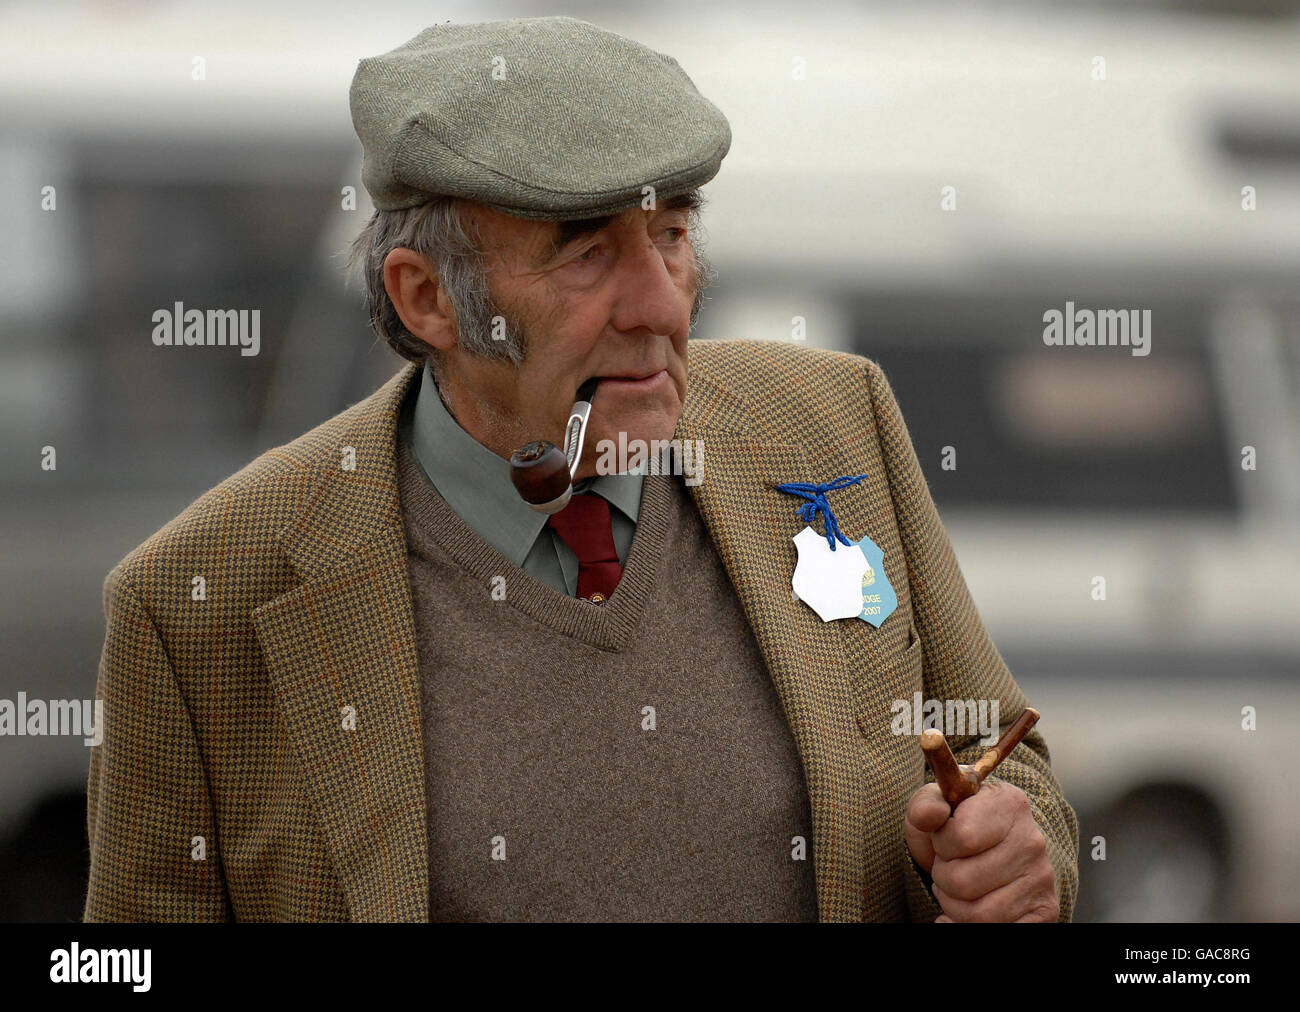 A spectator watches the action during the British National Ploughing Championships at Crockey Hill, near York. Stock Photo